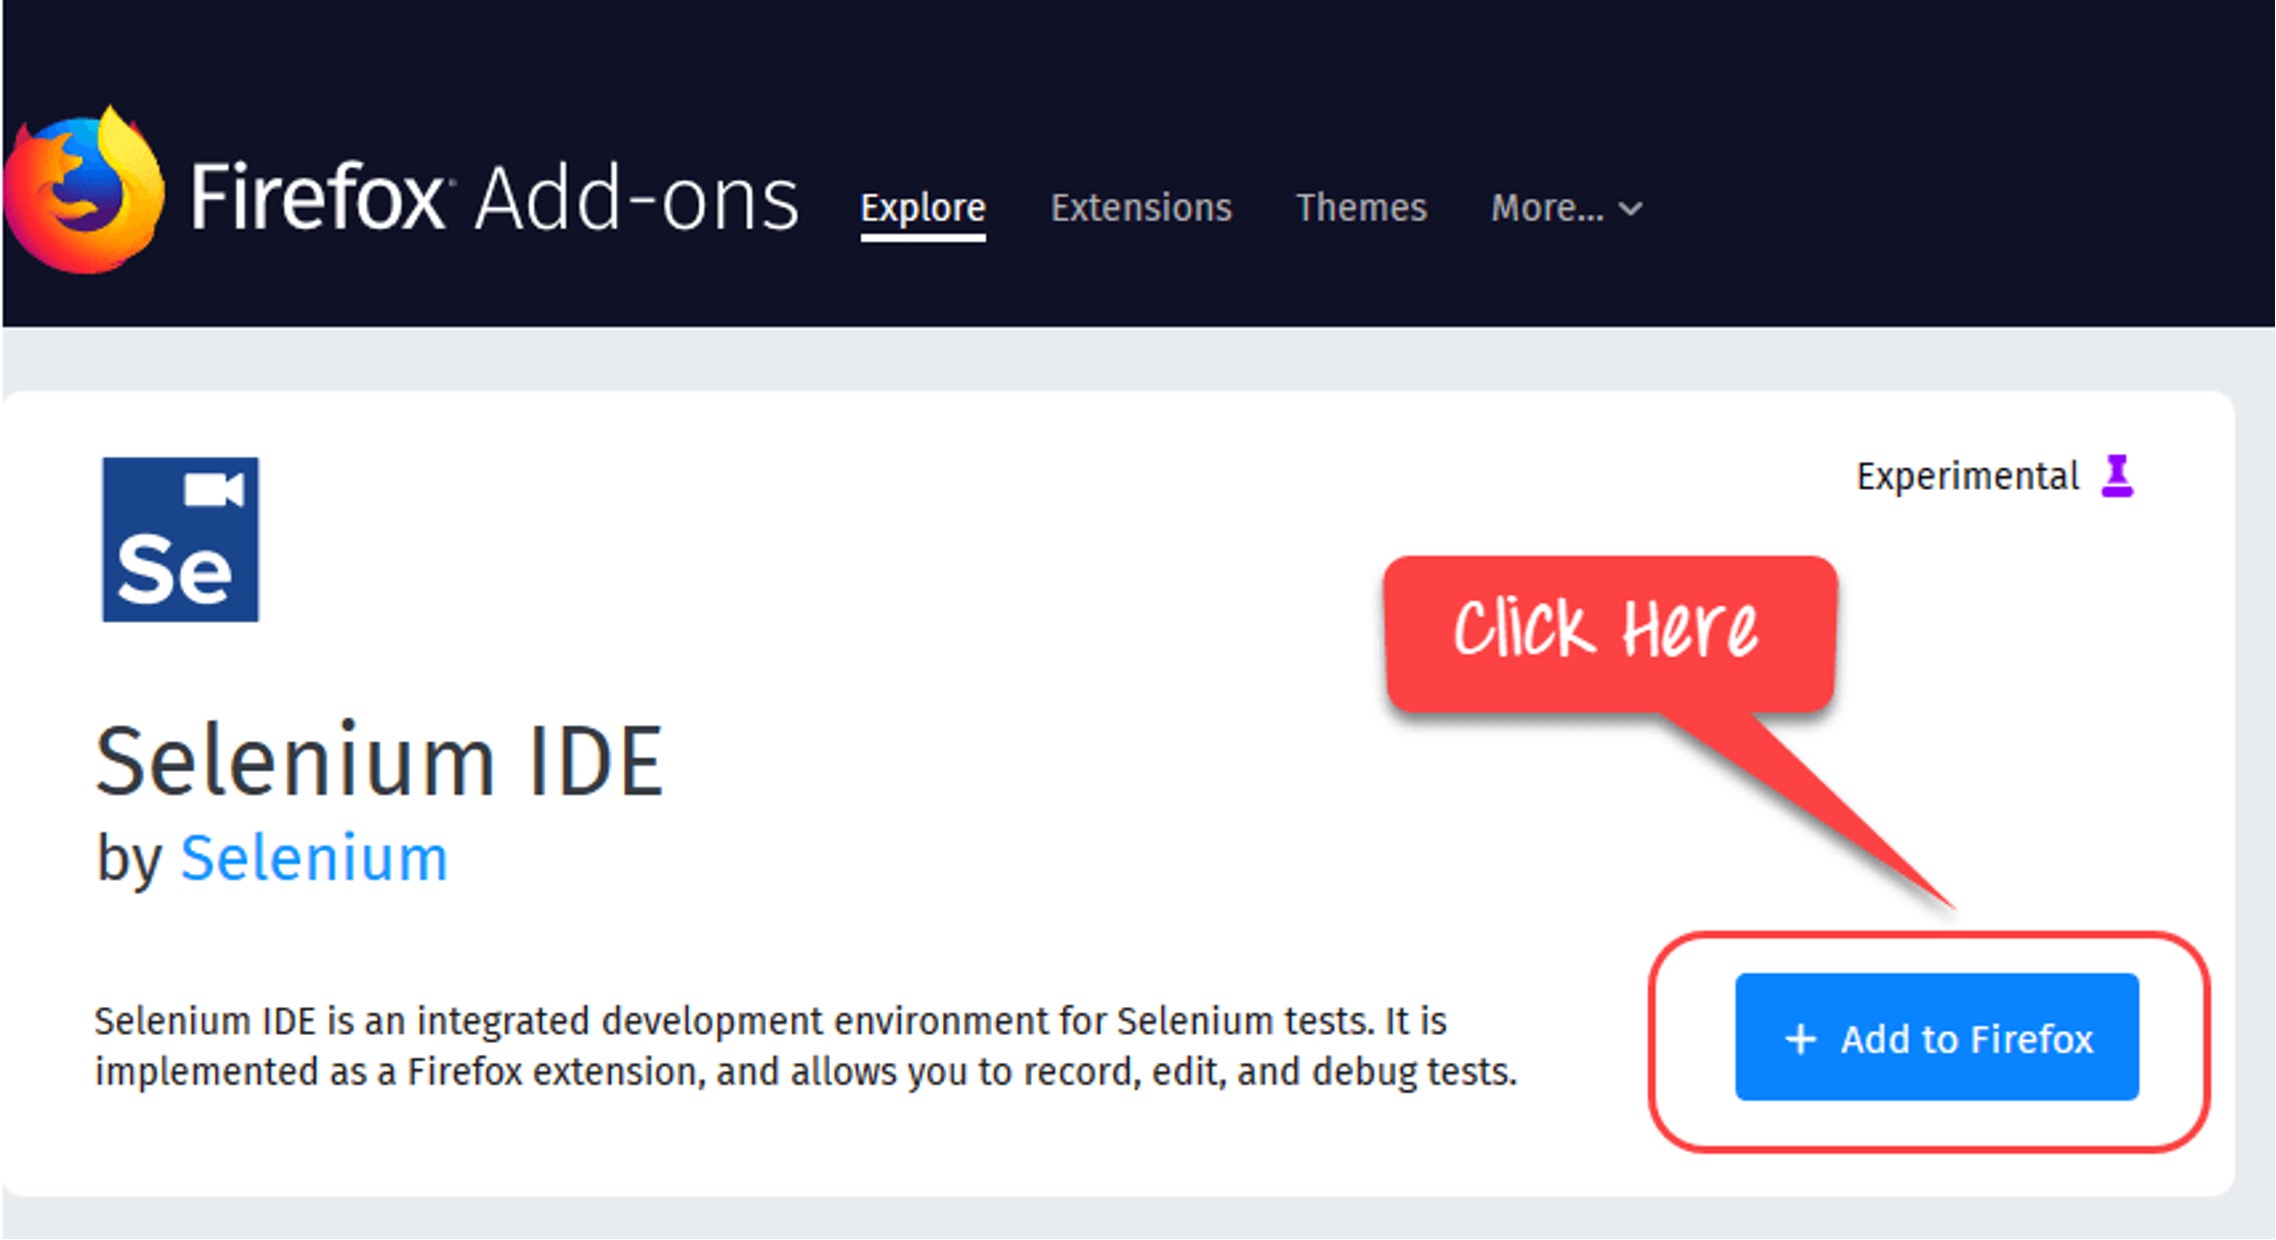 How To Install Selenium Ide On Firefox